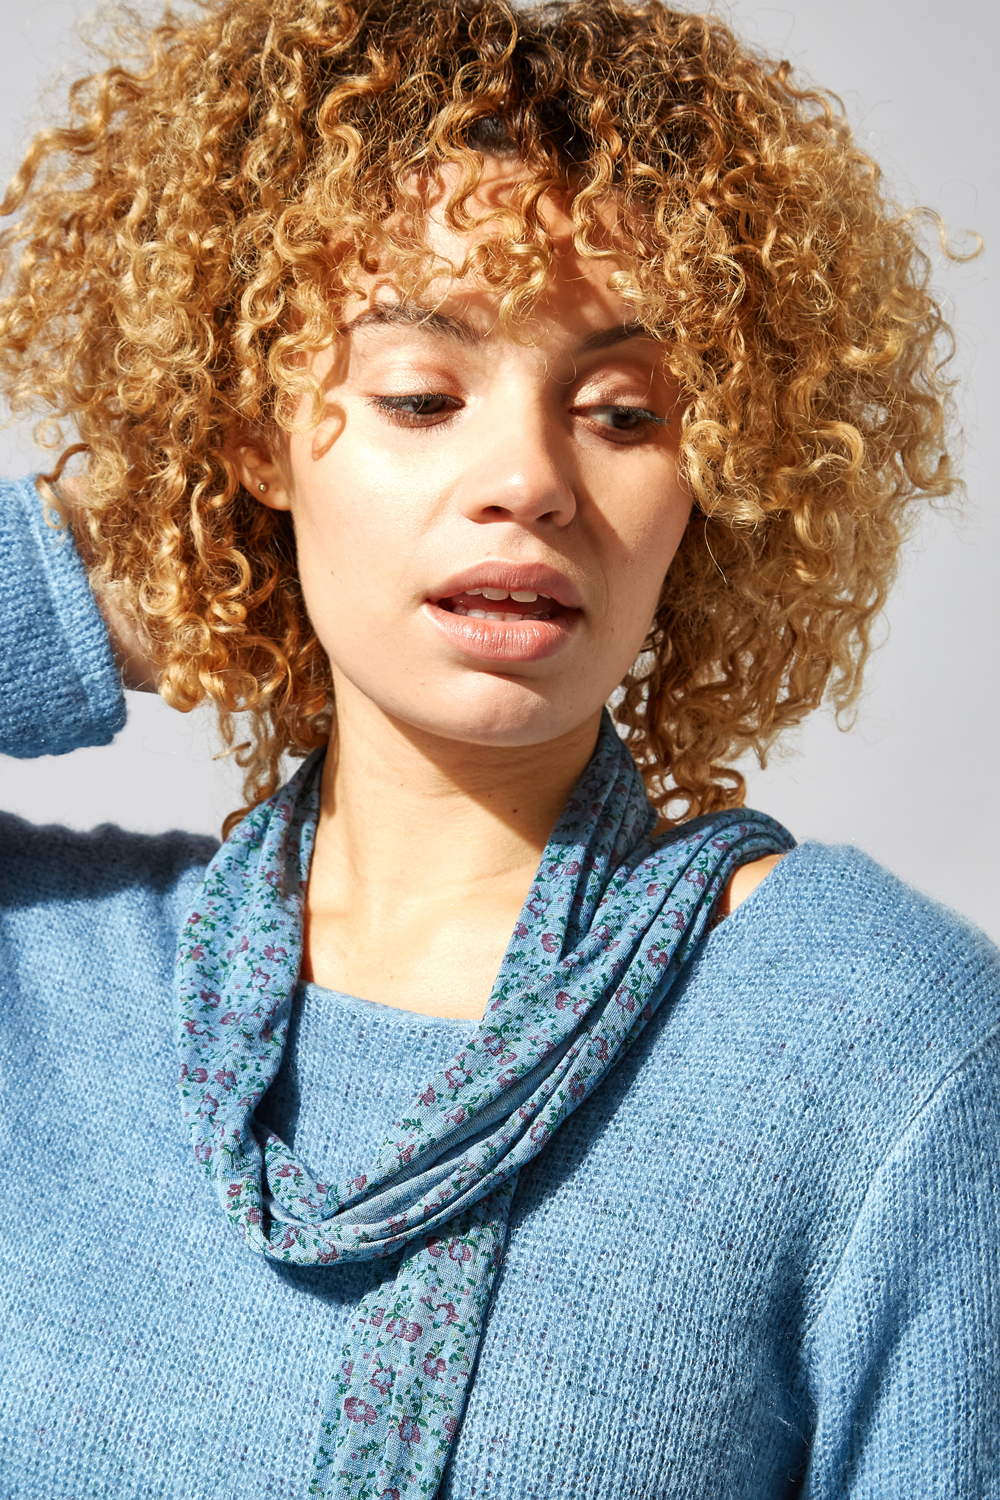 Denim Overlay Knit Top and Floral Scarf, Image 4 of 4